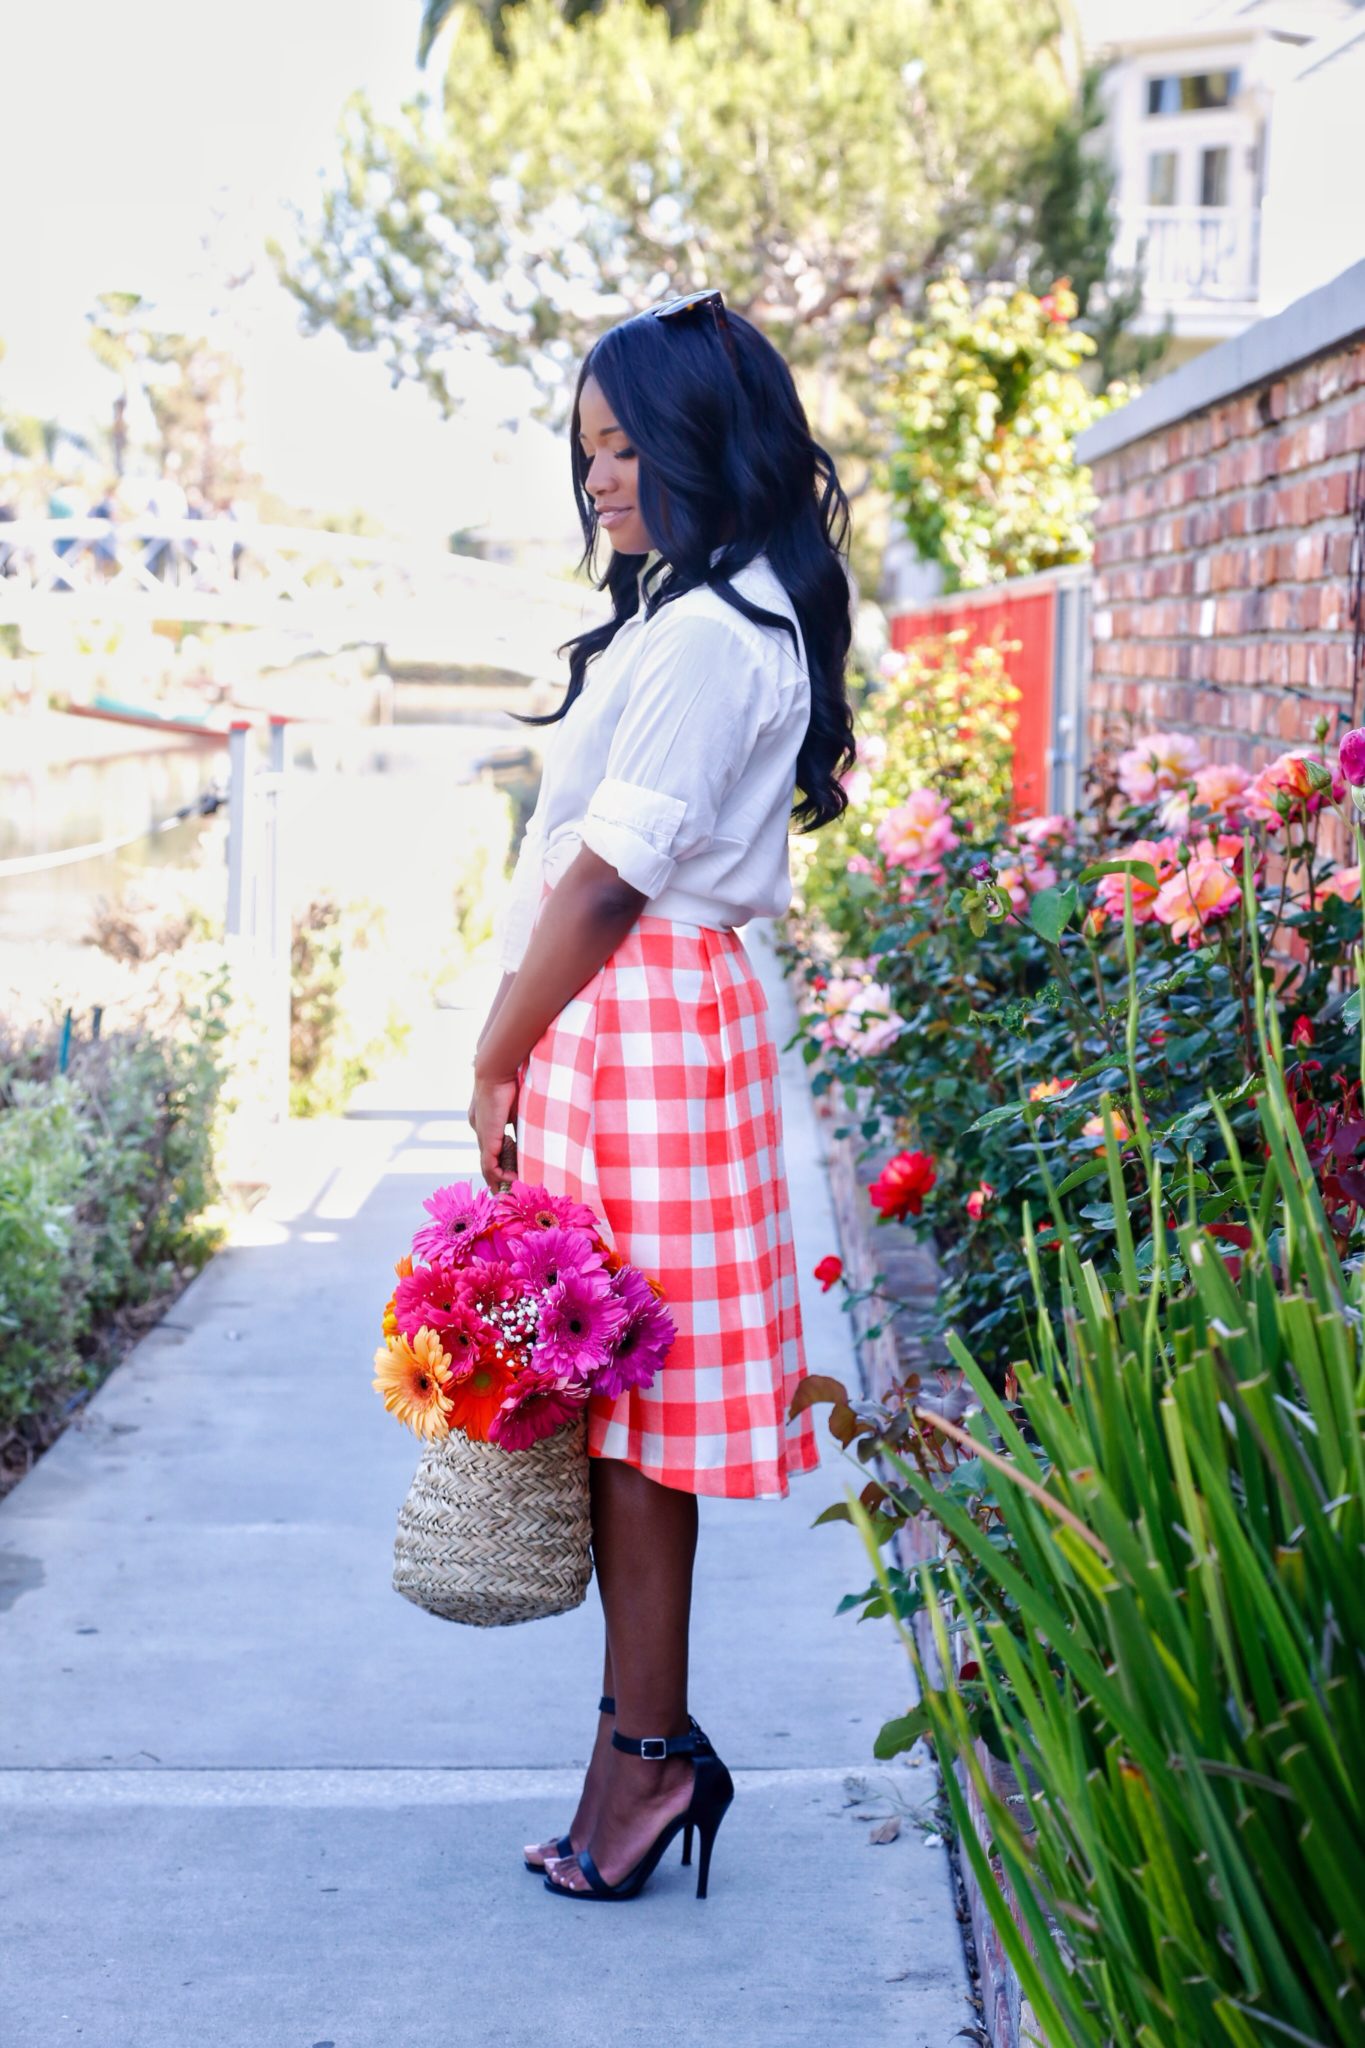 Gingham + Flowers on DowntownDemure.com - Modest Fashion Blog